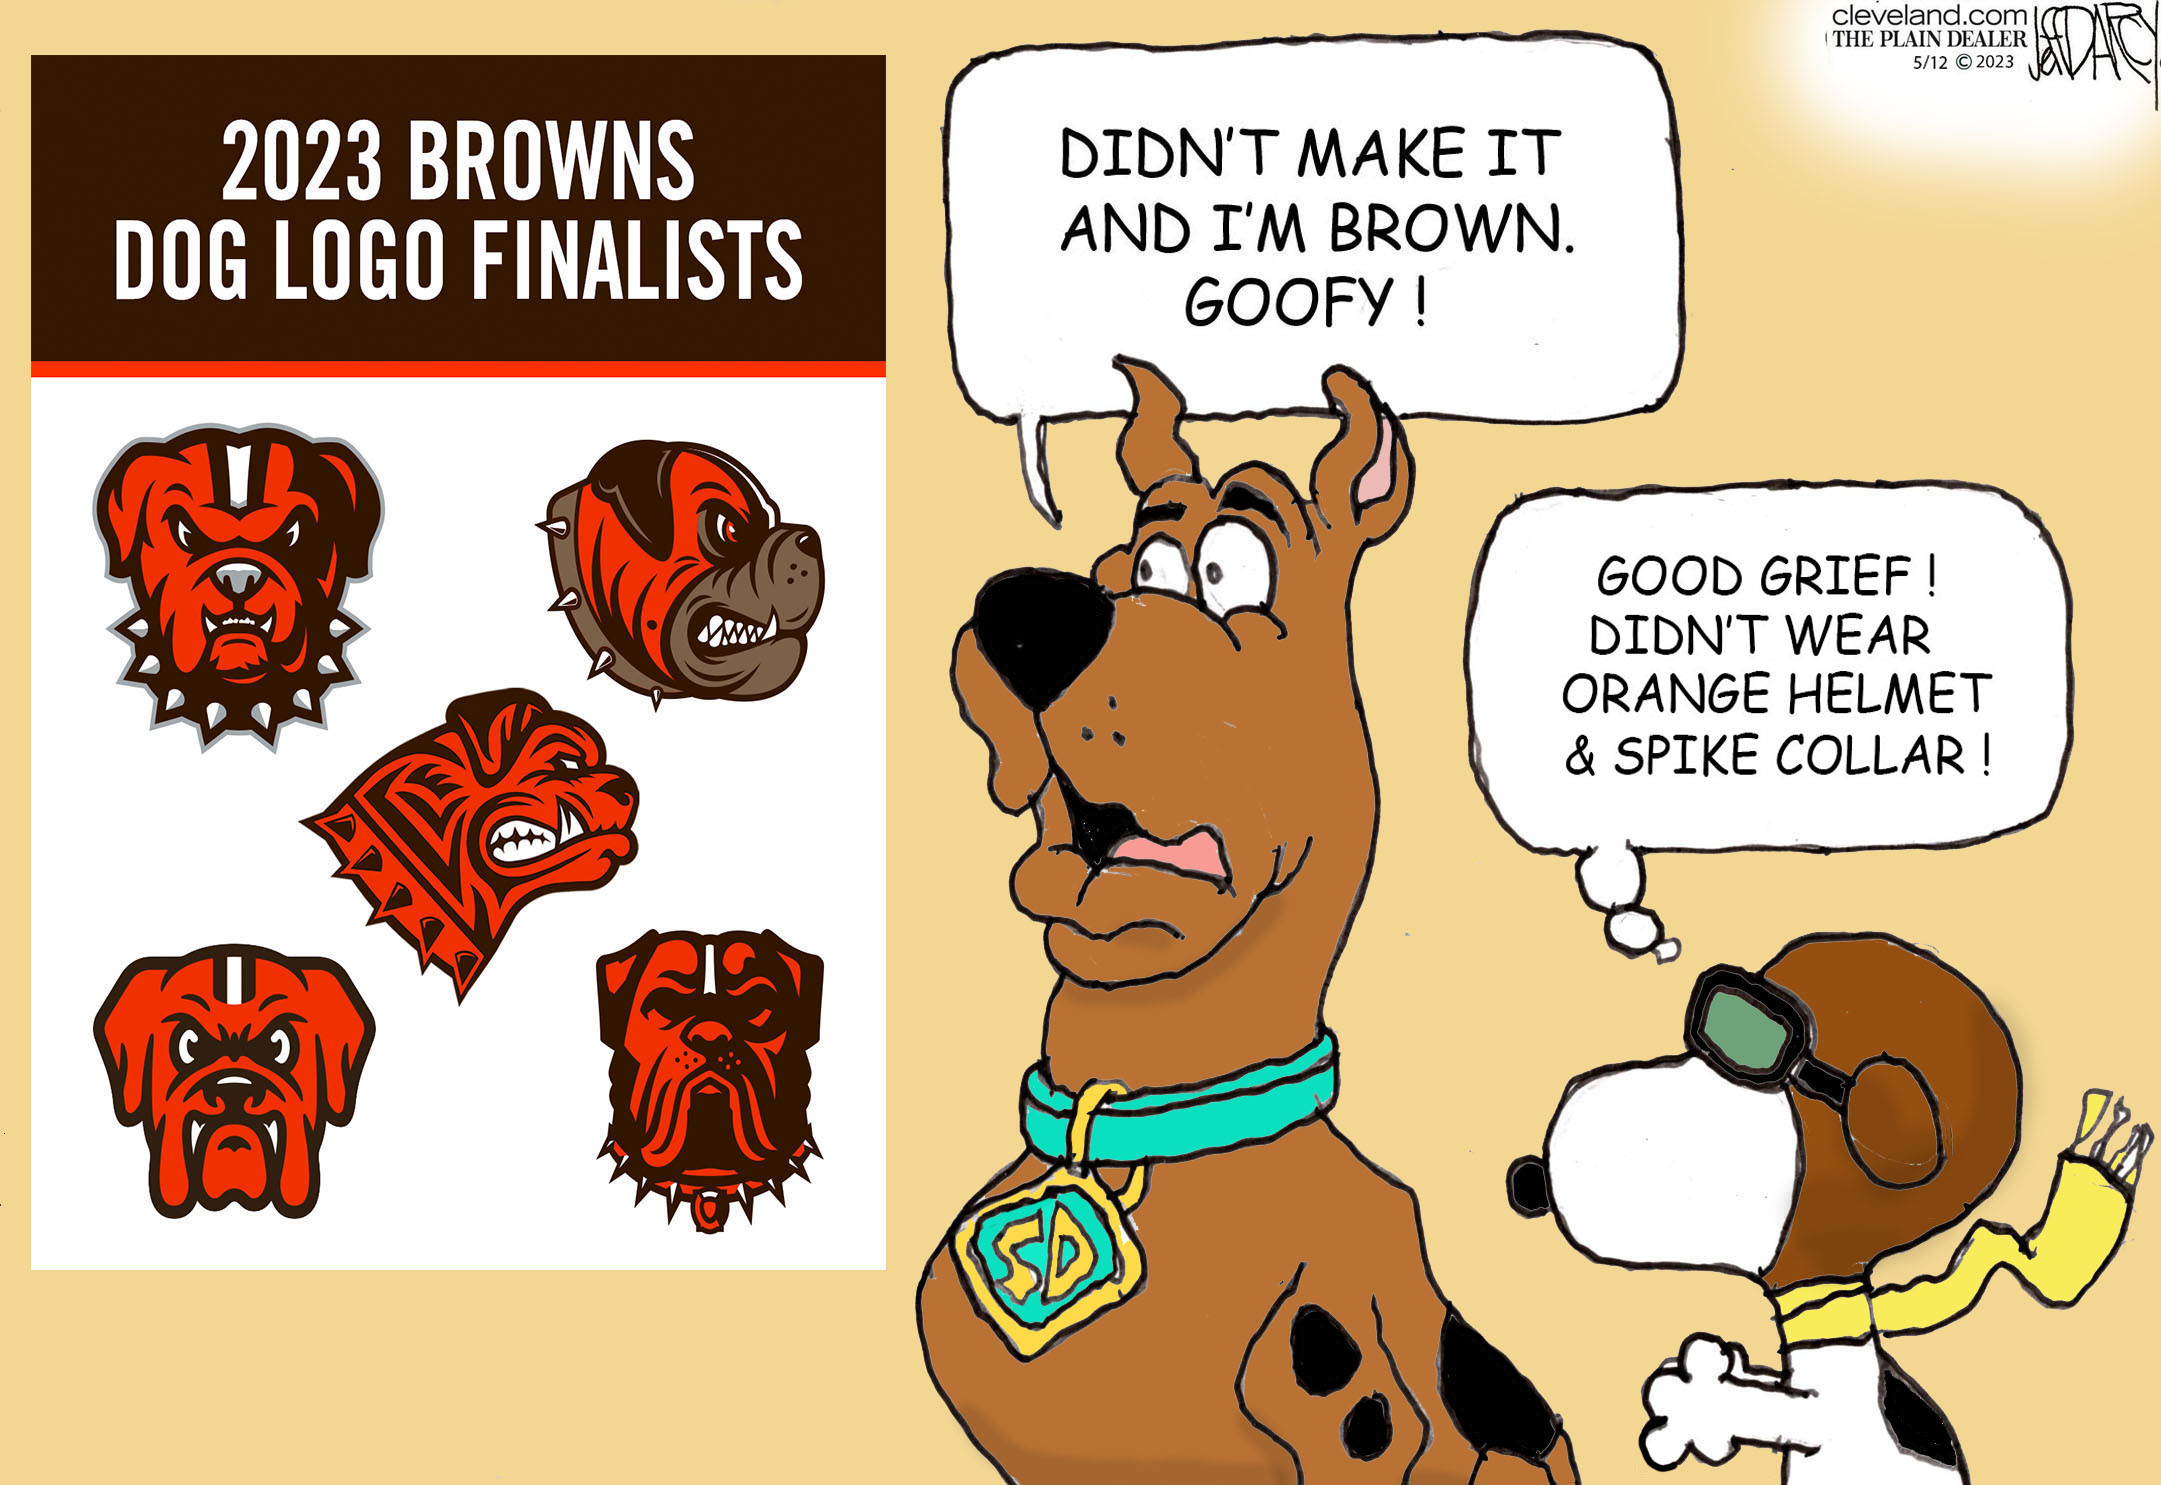 Browns will introduce live 'dawg' mascot 